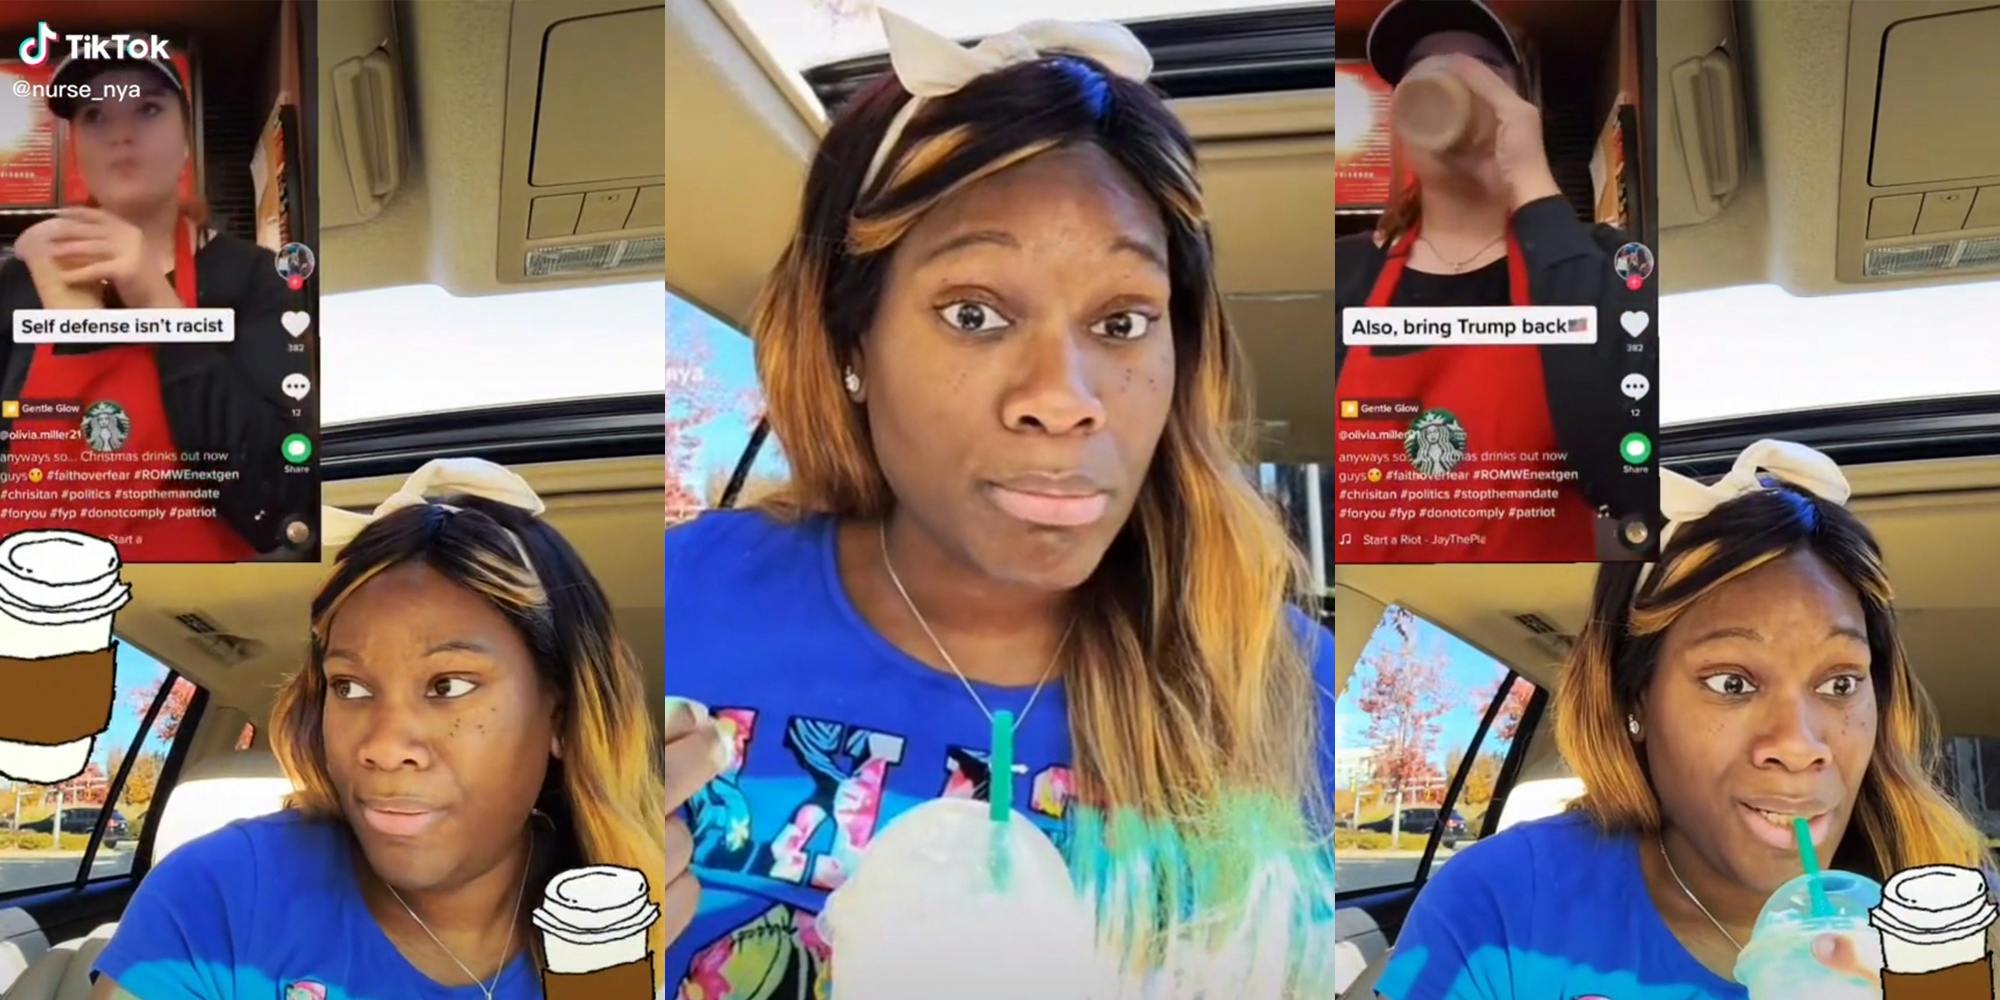 woman in car watching inset of starbucks worker with caption "self defense isn't racist" (l) woman in car with surprised look (c) woman drinking coffee with inset of starbucks worker with caption "Also, bring Trump back" (r)